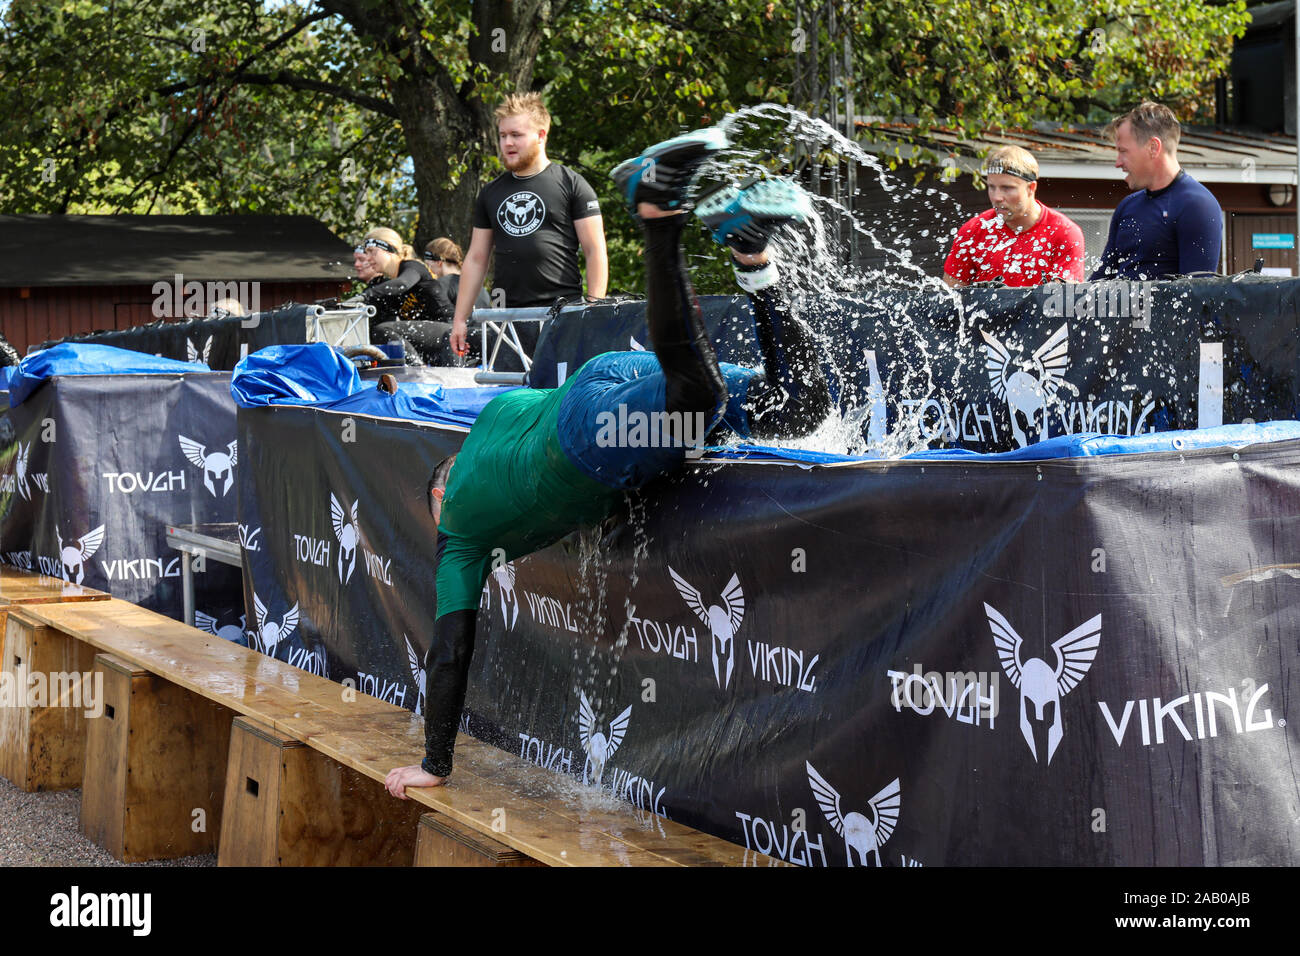 Tough Viking obstacle race participant jumping out of ice water pool in Helsinki, Finland Stock Photo